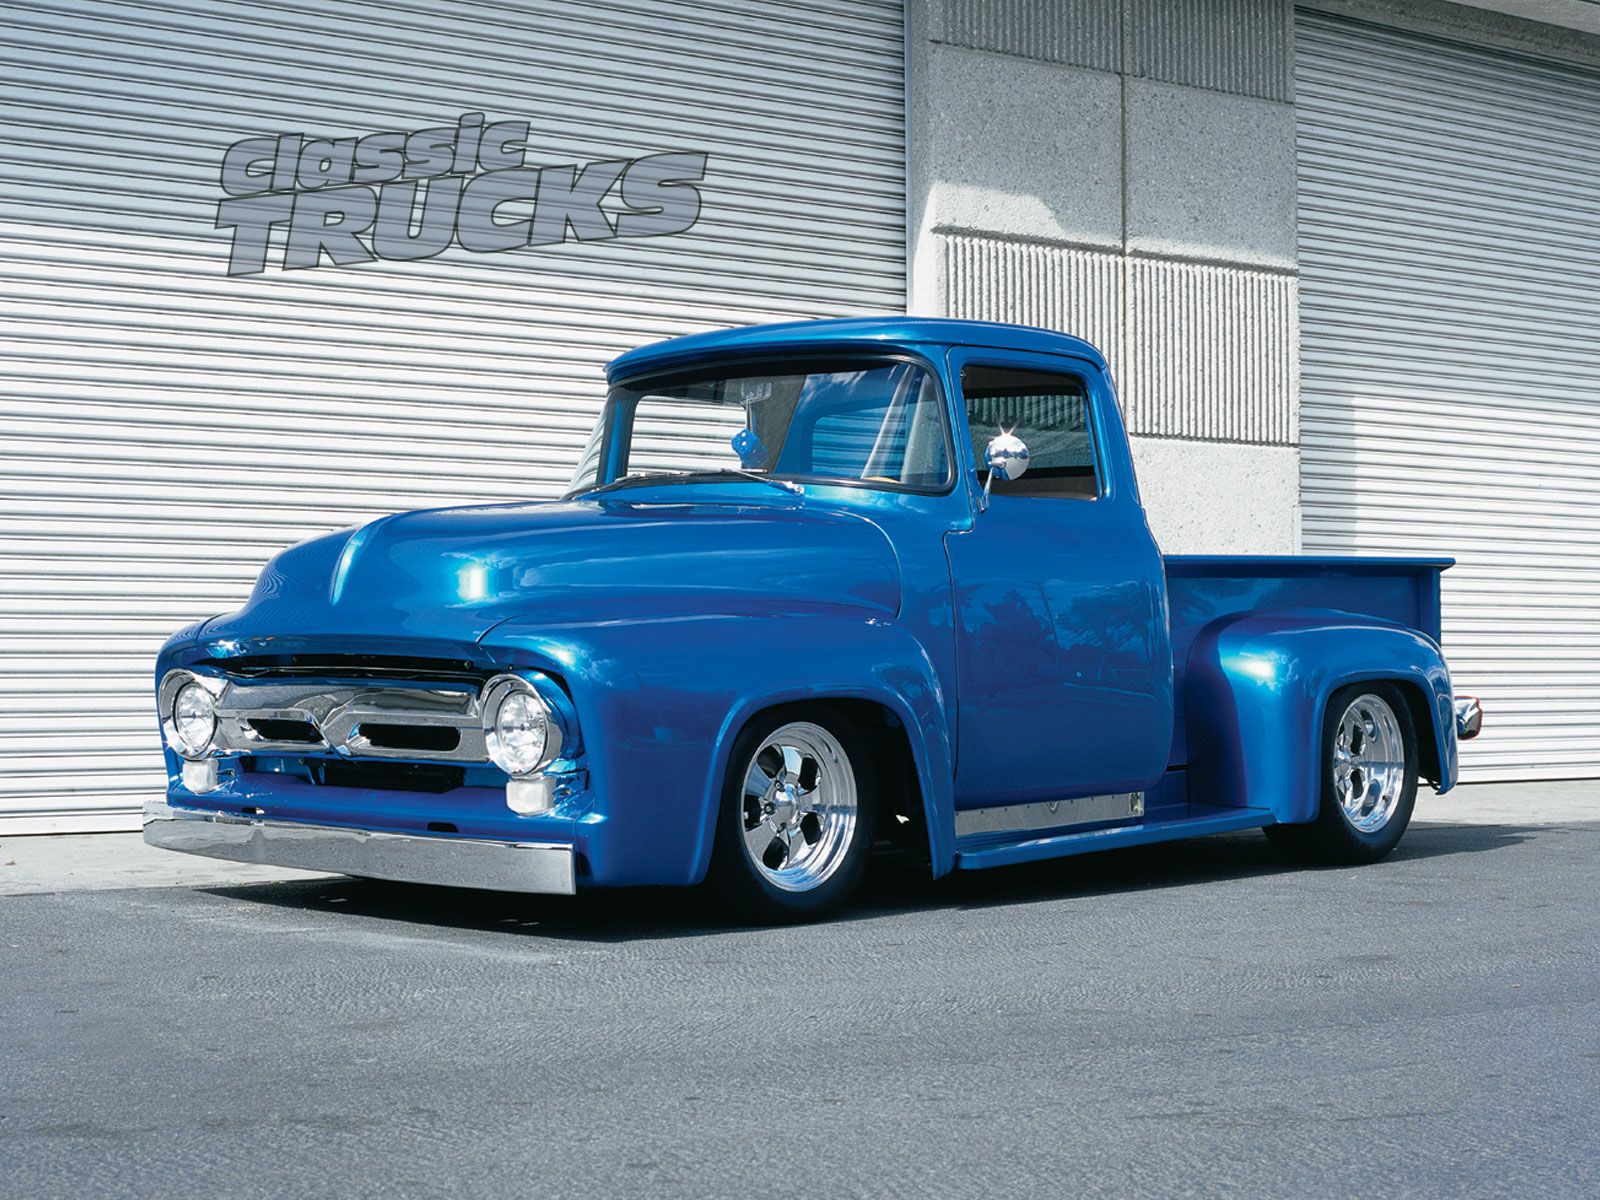 Free Download Old Ford Truck Wallpaper 1600x1200 For Your Desktop Mobile Tablet Explore 26 Ford F100 Wallpapers Ford F100 Wallpapers Ford Wallpaper Ford Wallpapers